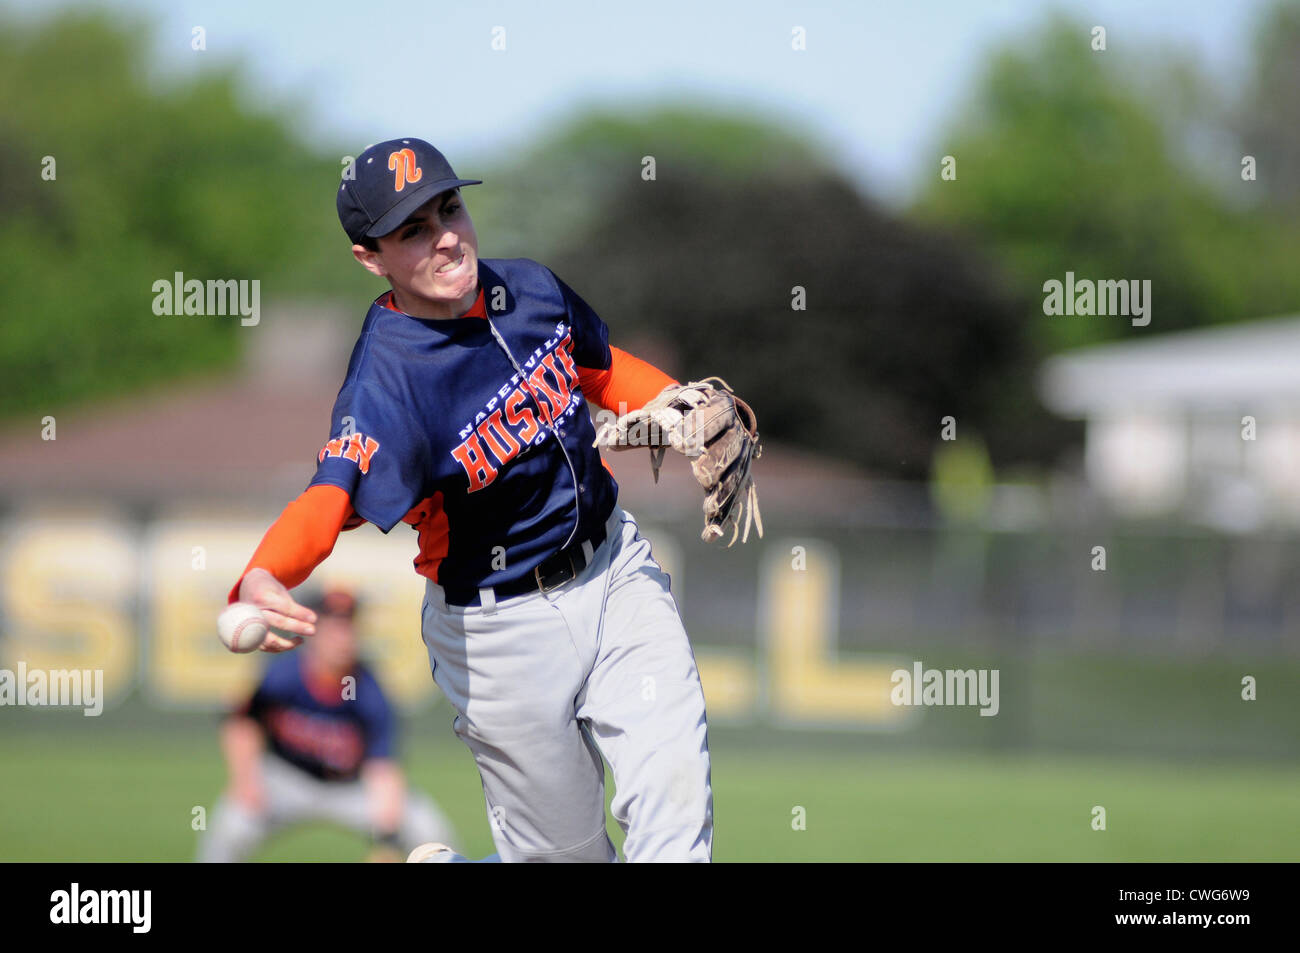 Baseball Pitcher with an unusual side arm delivery pitches during a high school game. USA. Stock Photo